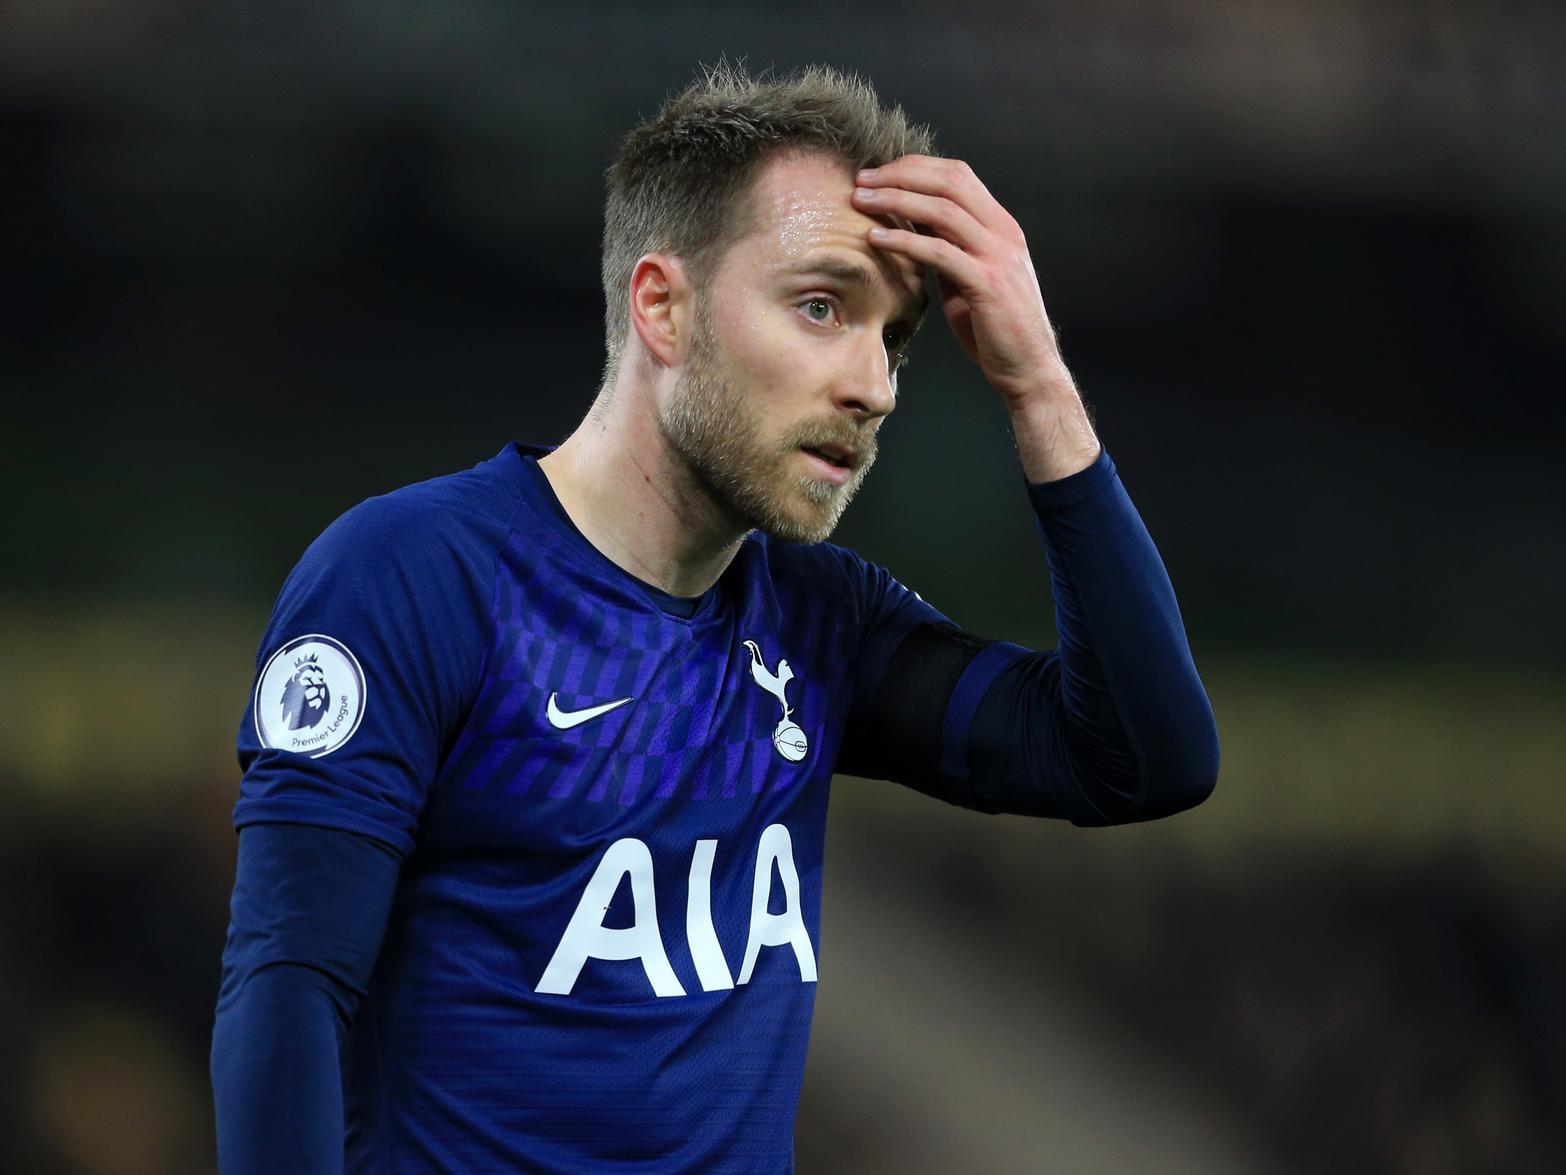 Tottenham Hotspur midfielder Christian Eriksen has reportedly agreed a four-and-a-half-year deal with Inter Milan, and will cost around 17m to prise away from North London with only months left on his contract. (Gazzetta dello Sport)